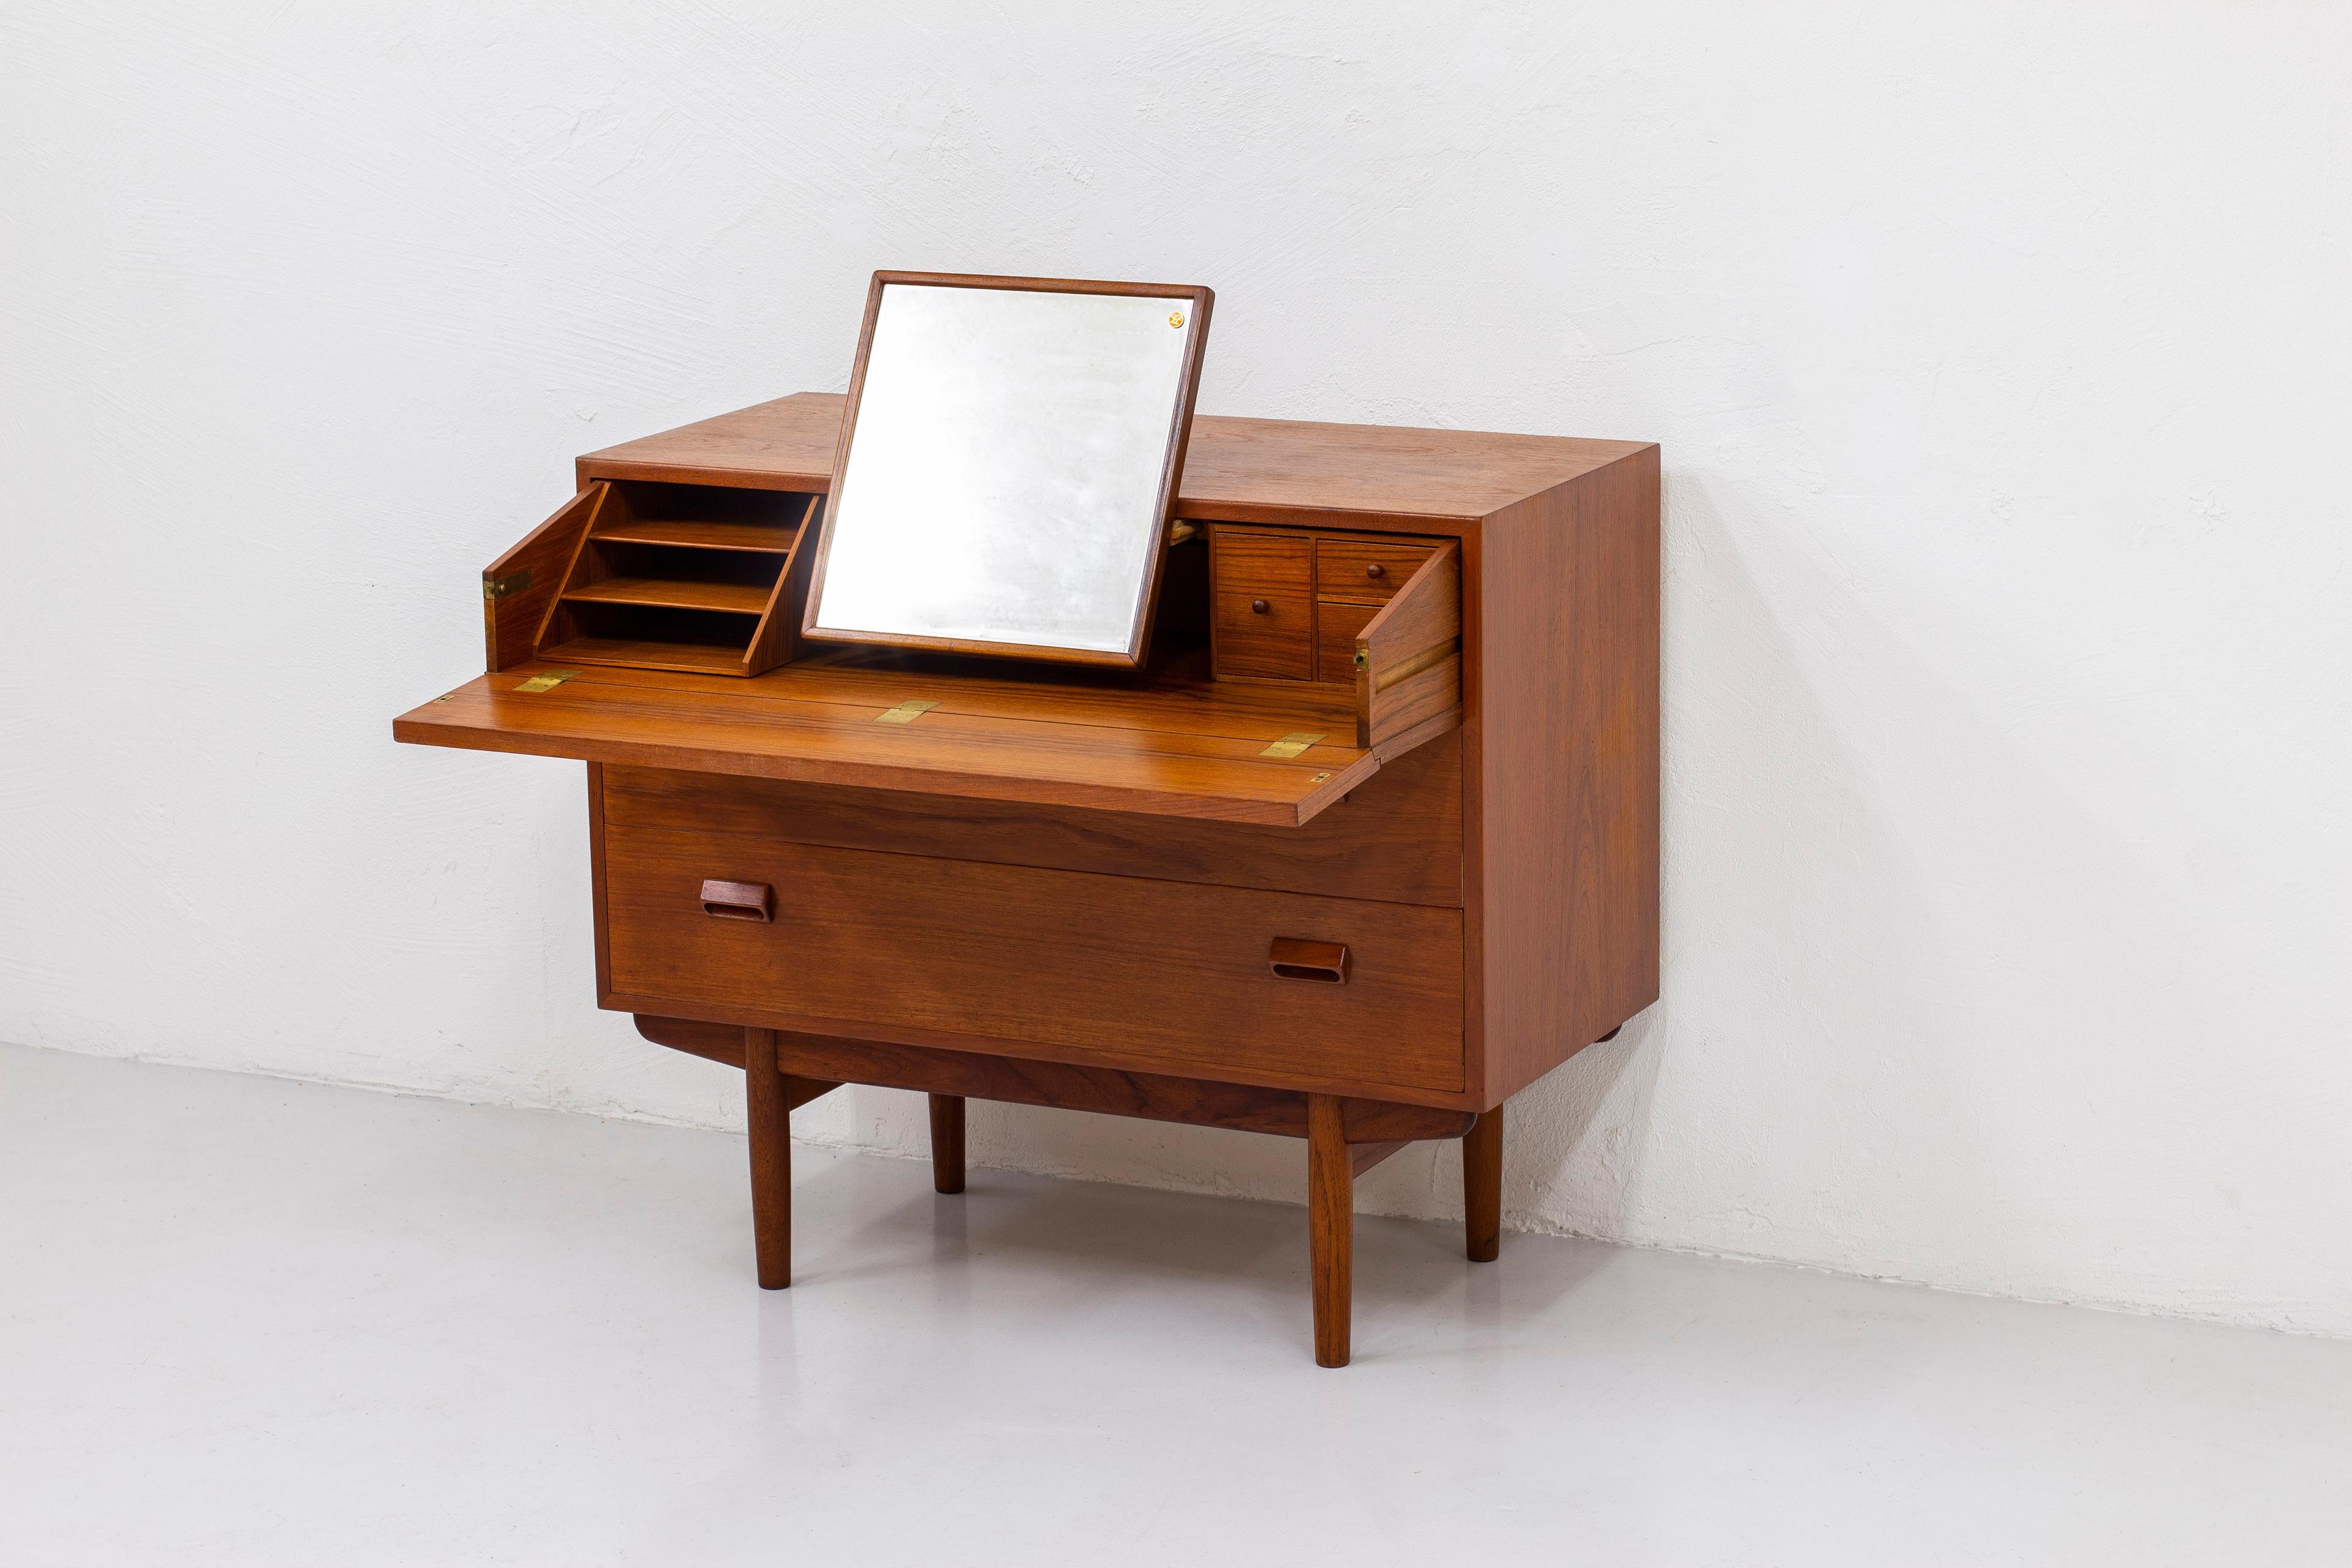 Chest of drawers with built in vanity mirror and flip down table surface designed by Børge Mogensen. Produced in Denmark by Søborg during the 1950s. Made from teak with brass details. Inside of the drawers with maple. good vintage condition with age